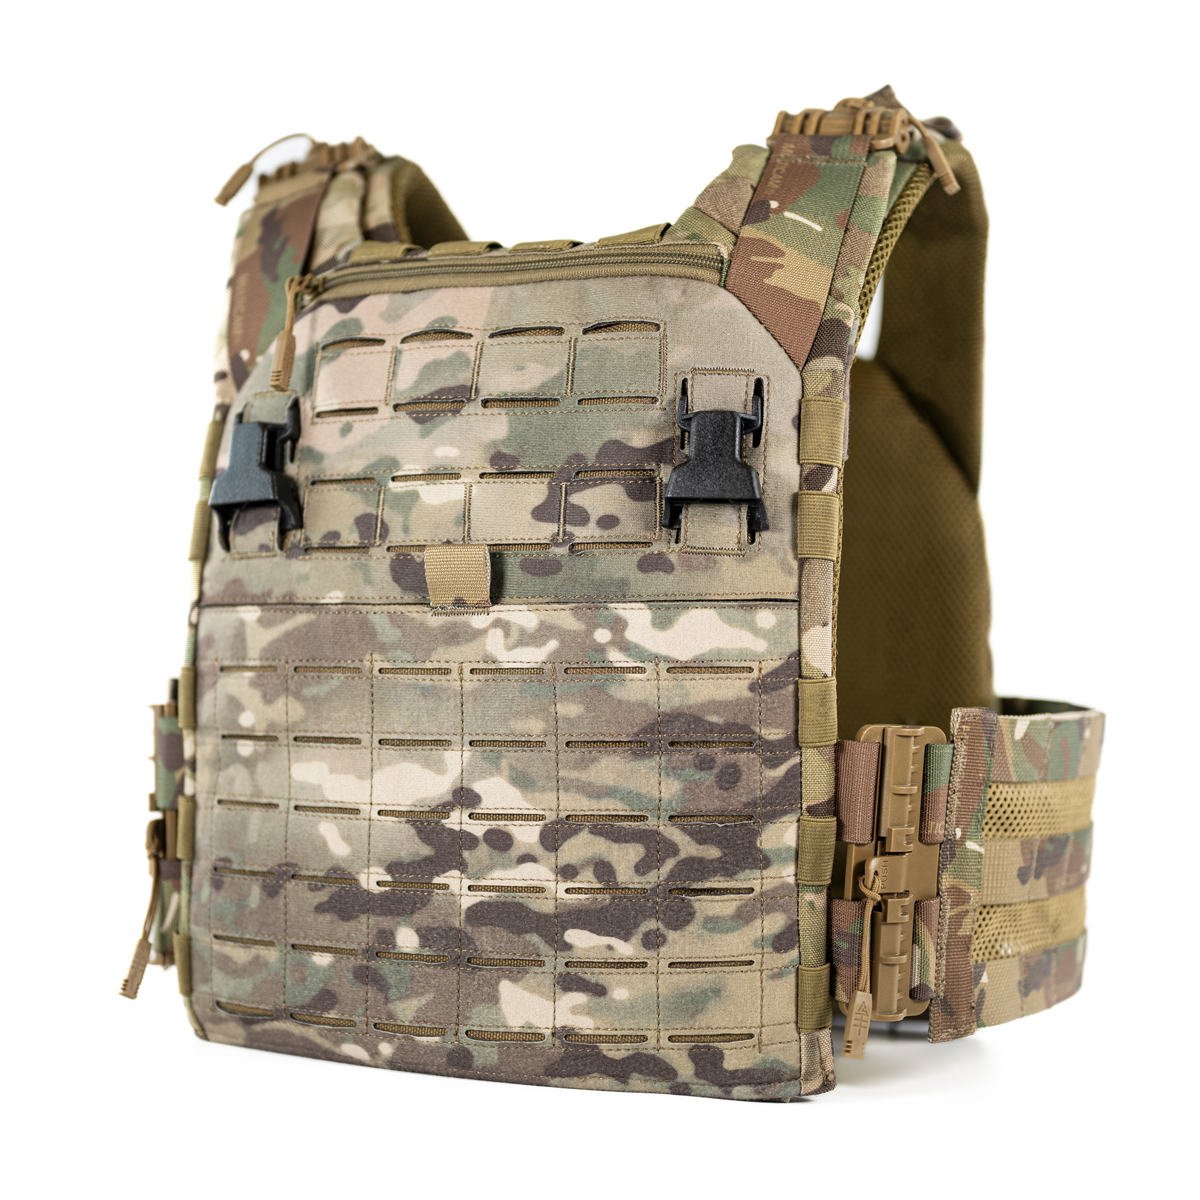 Rma armament. SPC - scalable Plate Carrier. Ballistic Plate Carrier. Plate Carrier Black. Ballistic layer Plate Carrier.